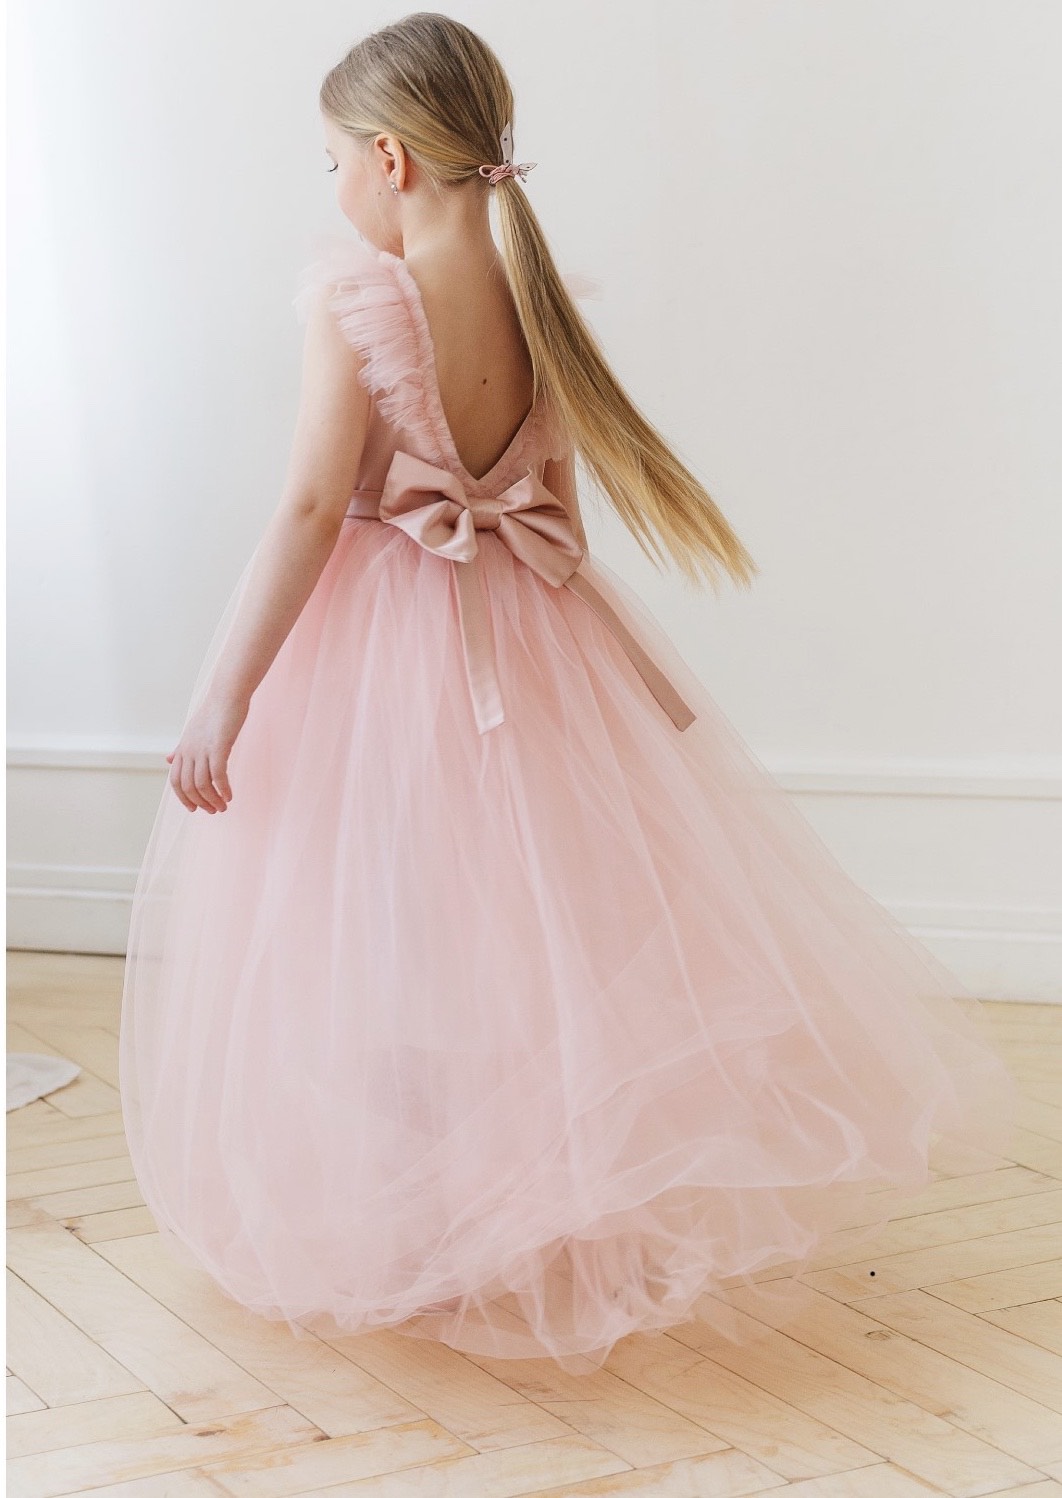 Girl in pink dress with bow